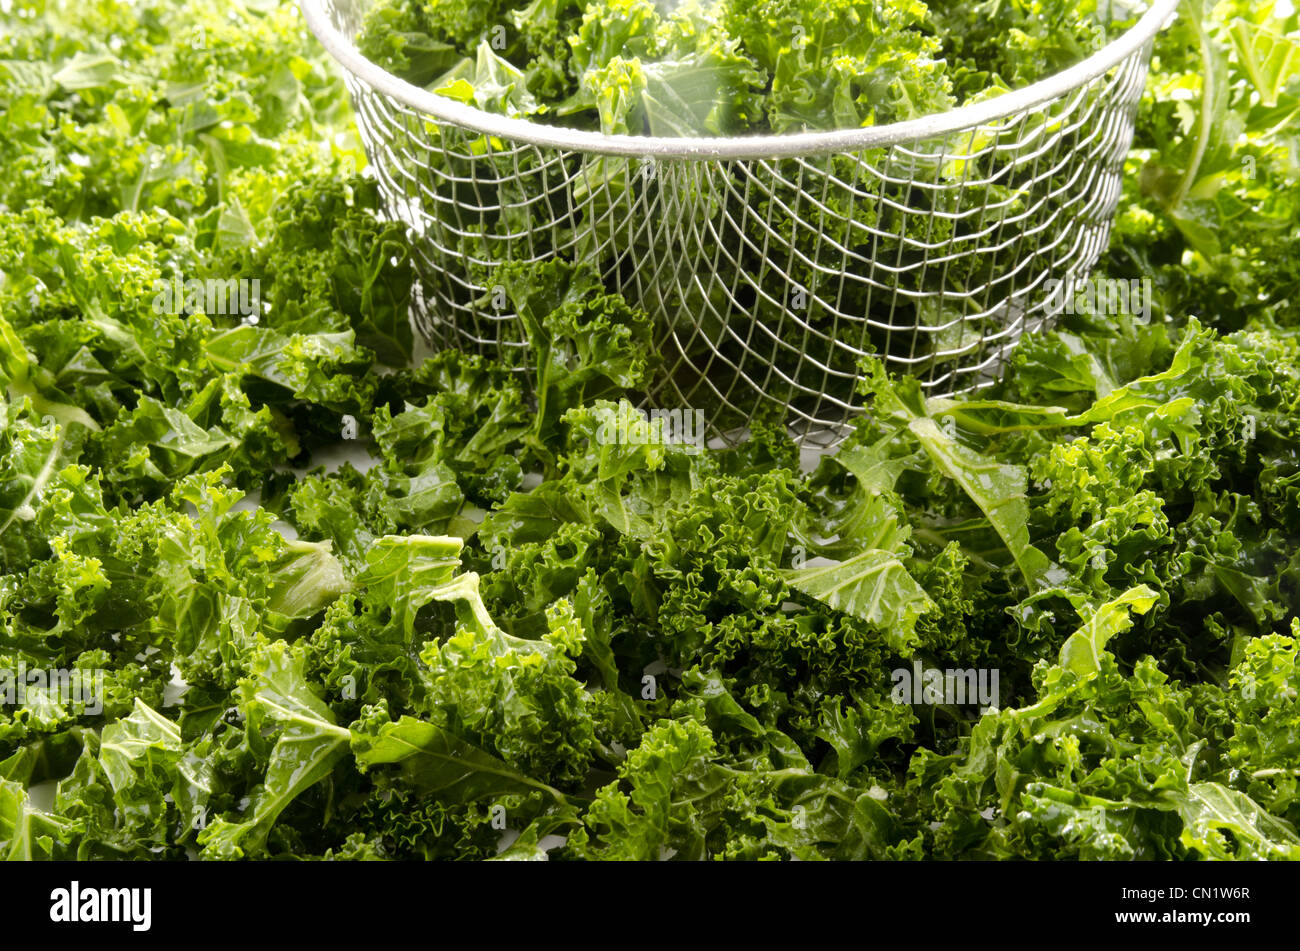 Washed and sliced curly kale in a colander Stock Photo